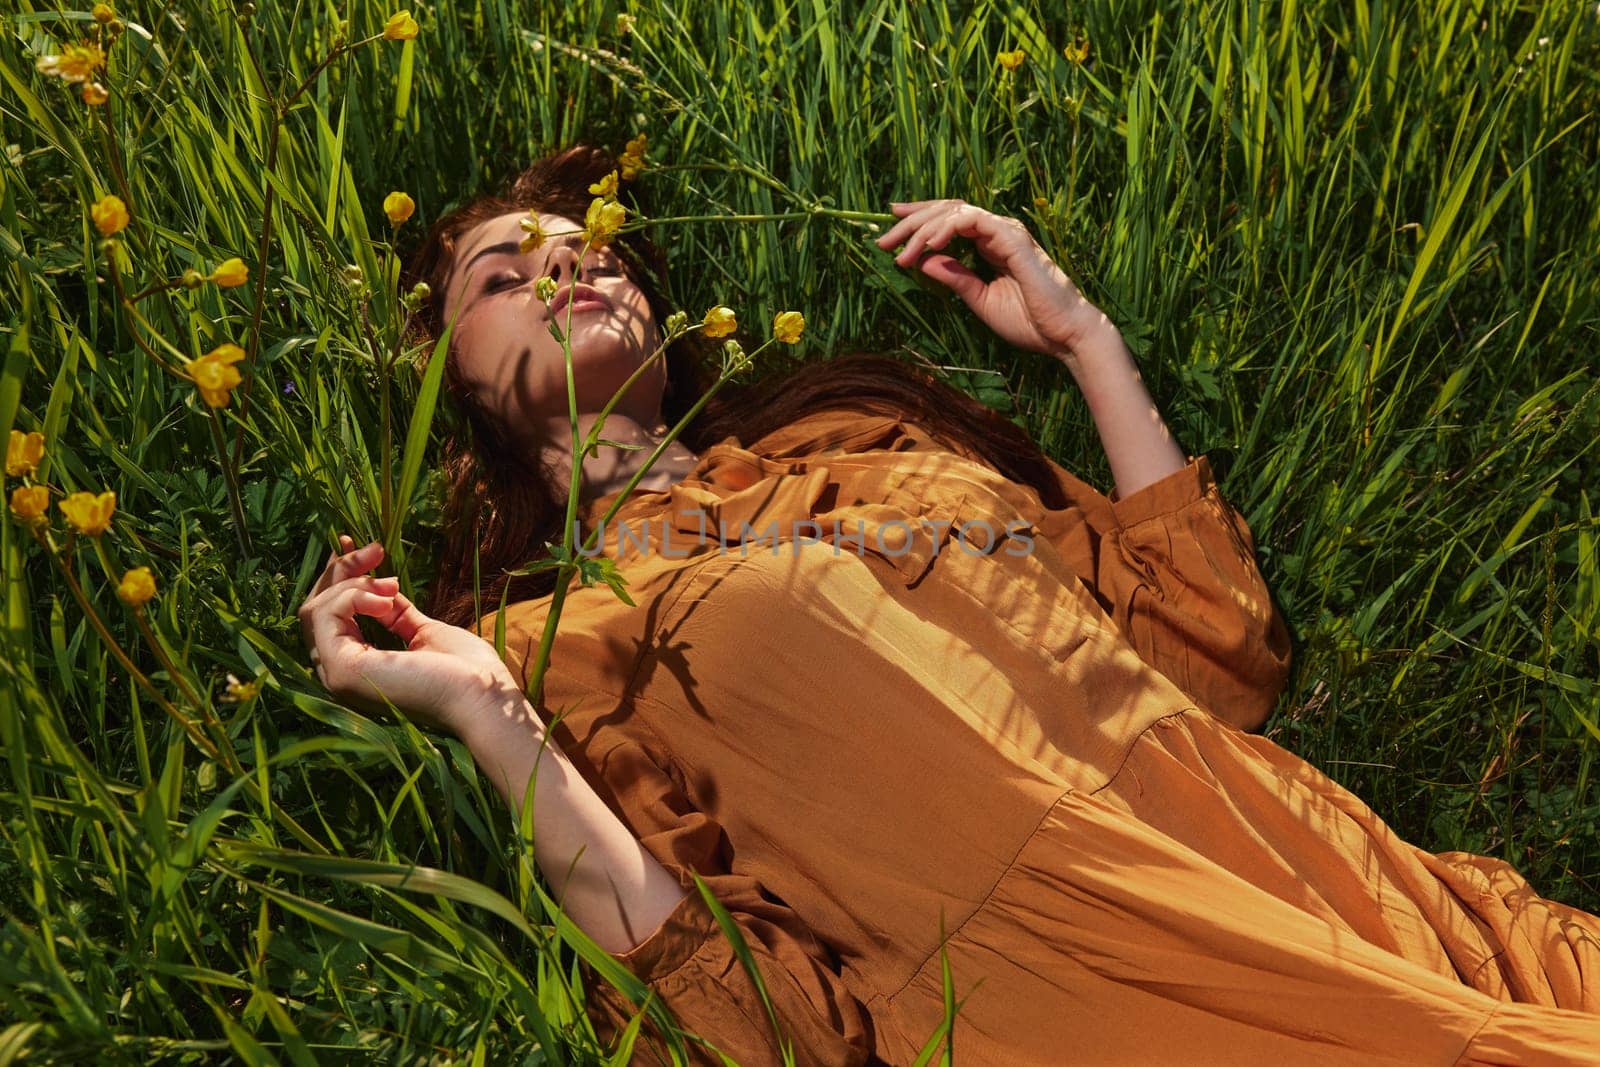 a calm woman with long red hair lies in a green field with yellow flowers, in an orange dress with her eyes closed, spreading her arms to the sides, enjoying peace and recuperating by Vichizh